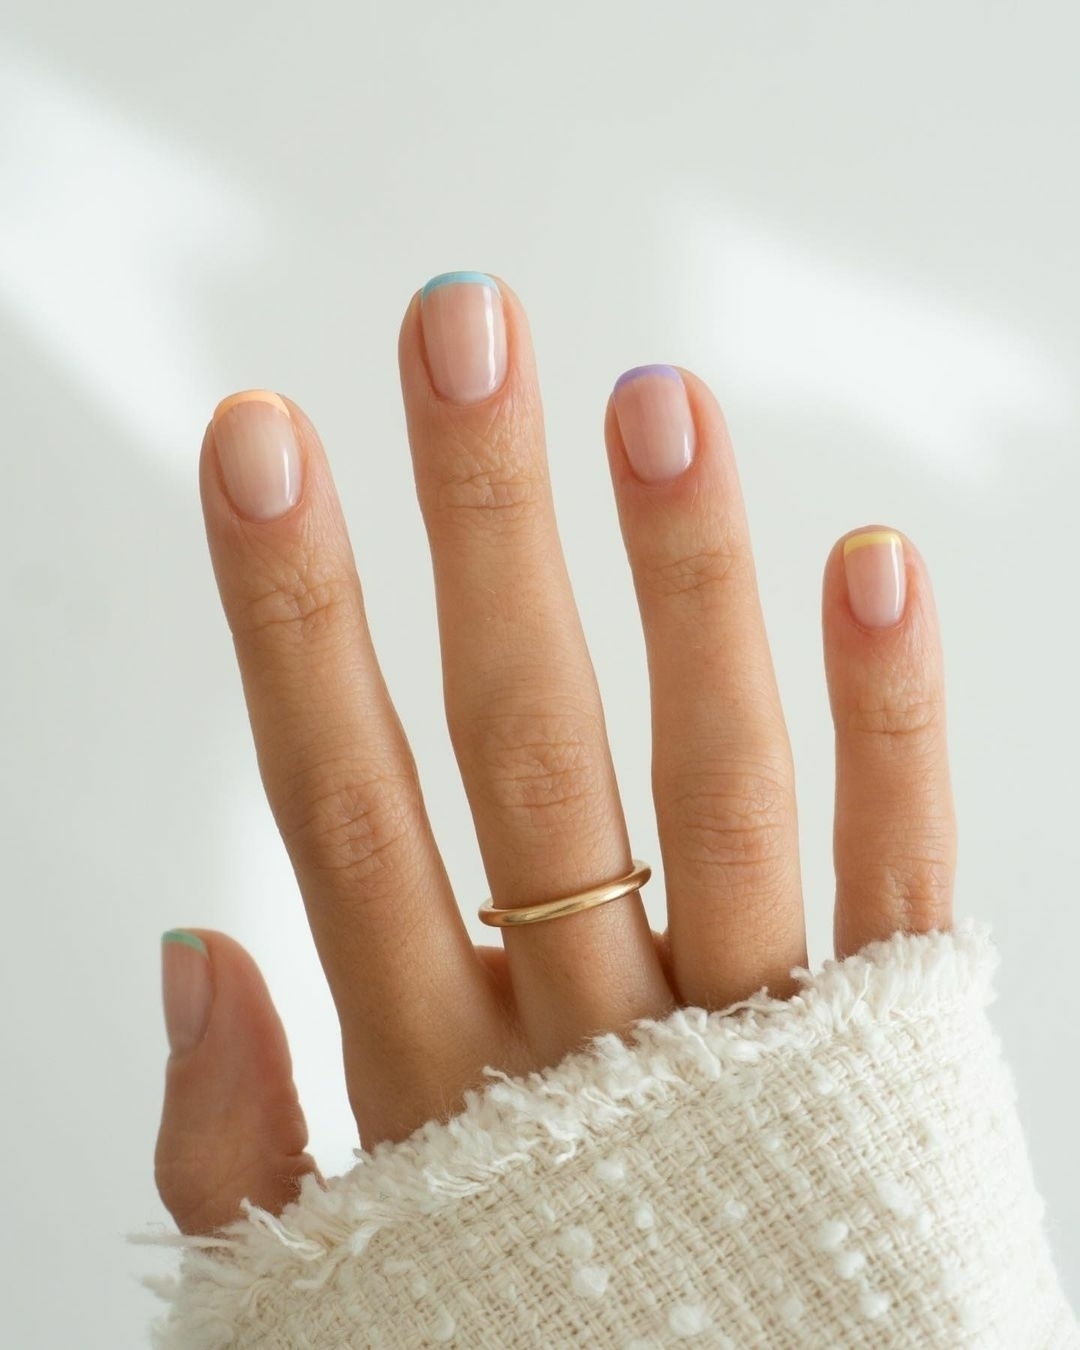 26 Trendy New Year's Nails to Ring in 2022